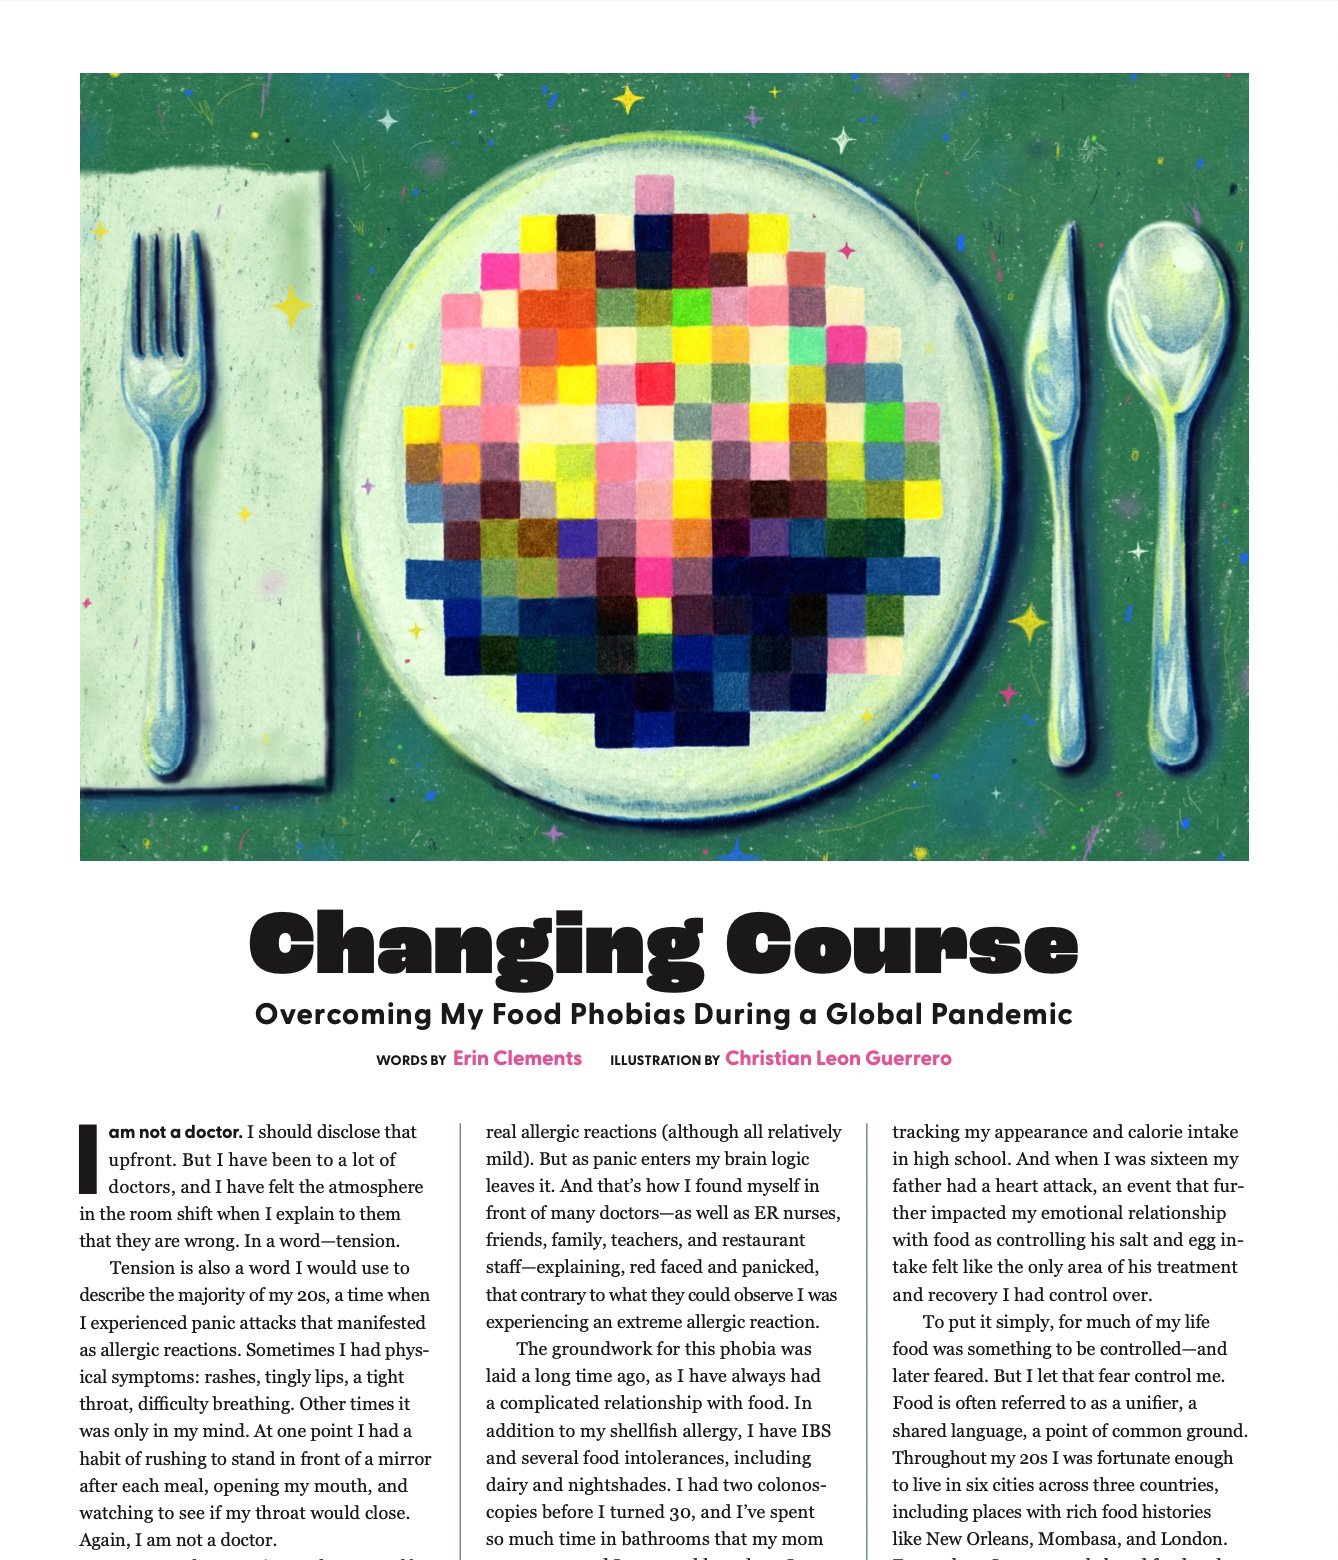 "Changing Course Overcoming My Food Phobias During a Global Pandemic" 